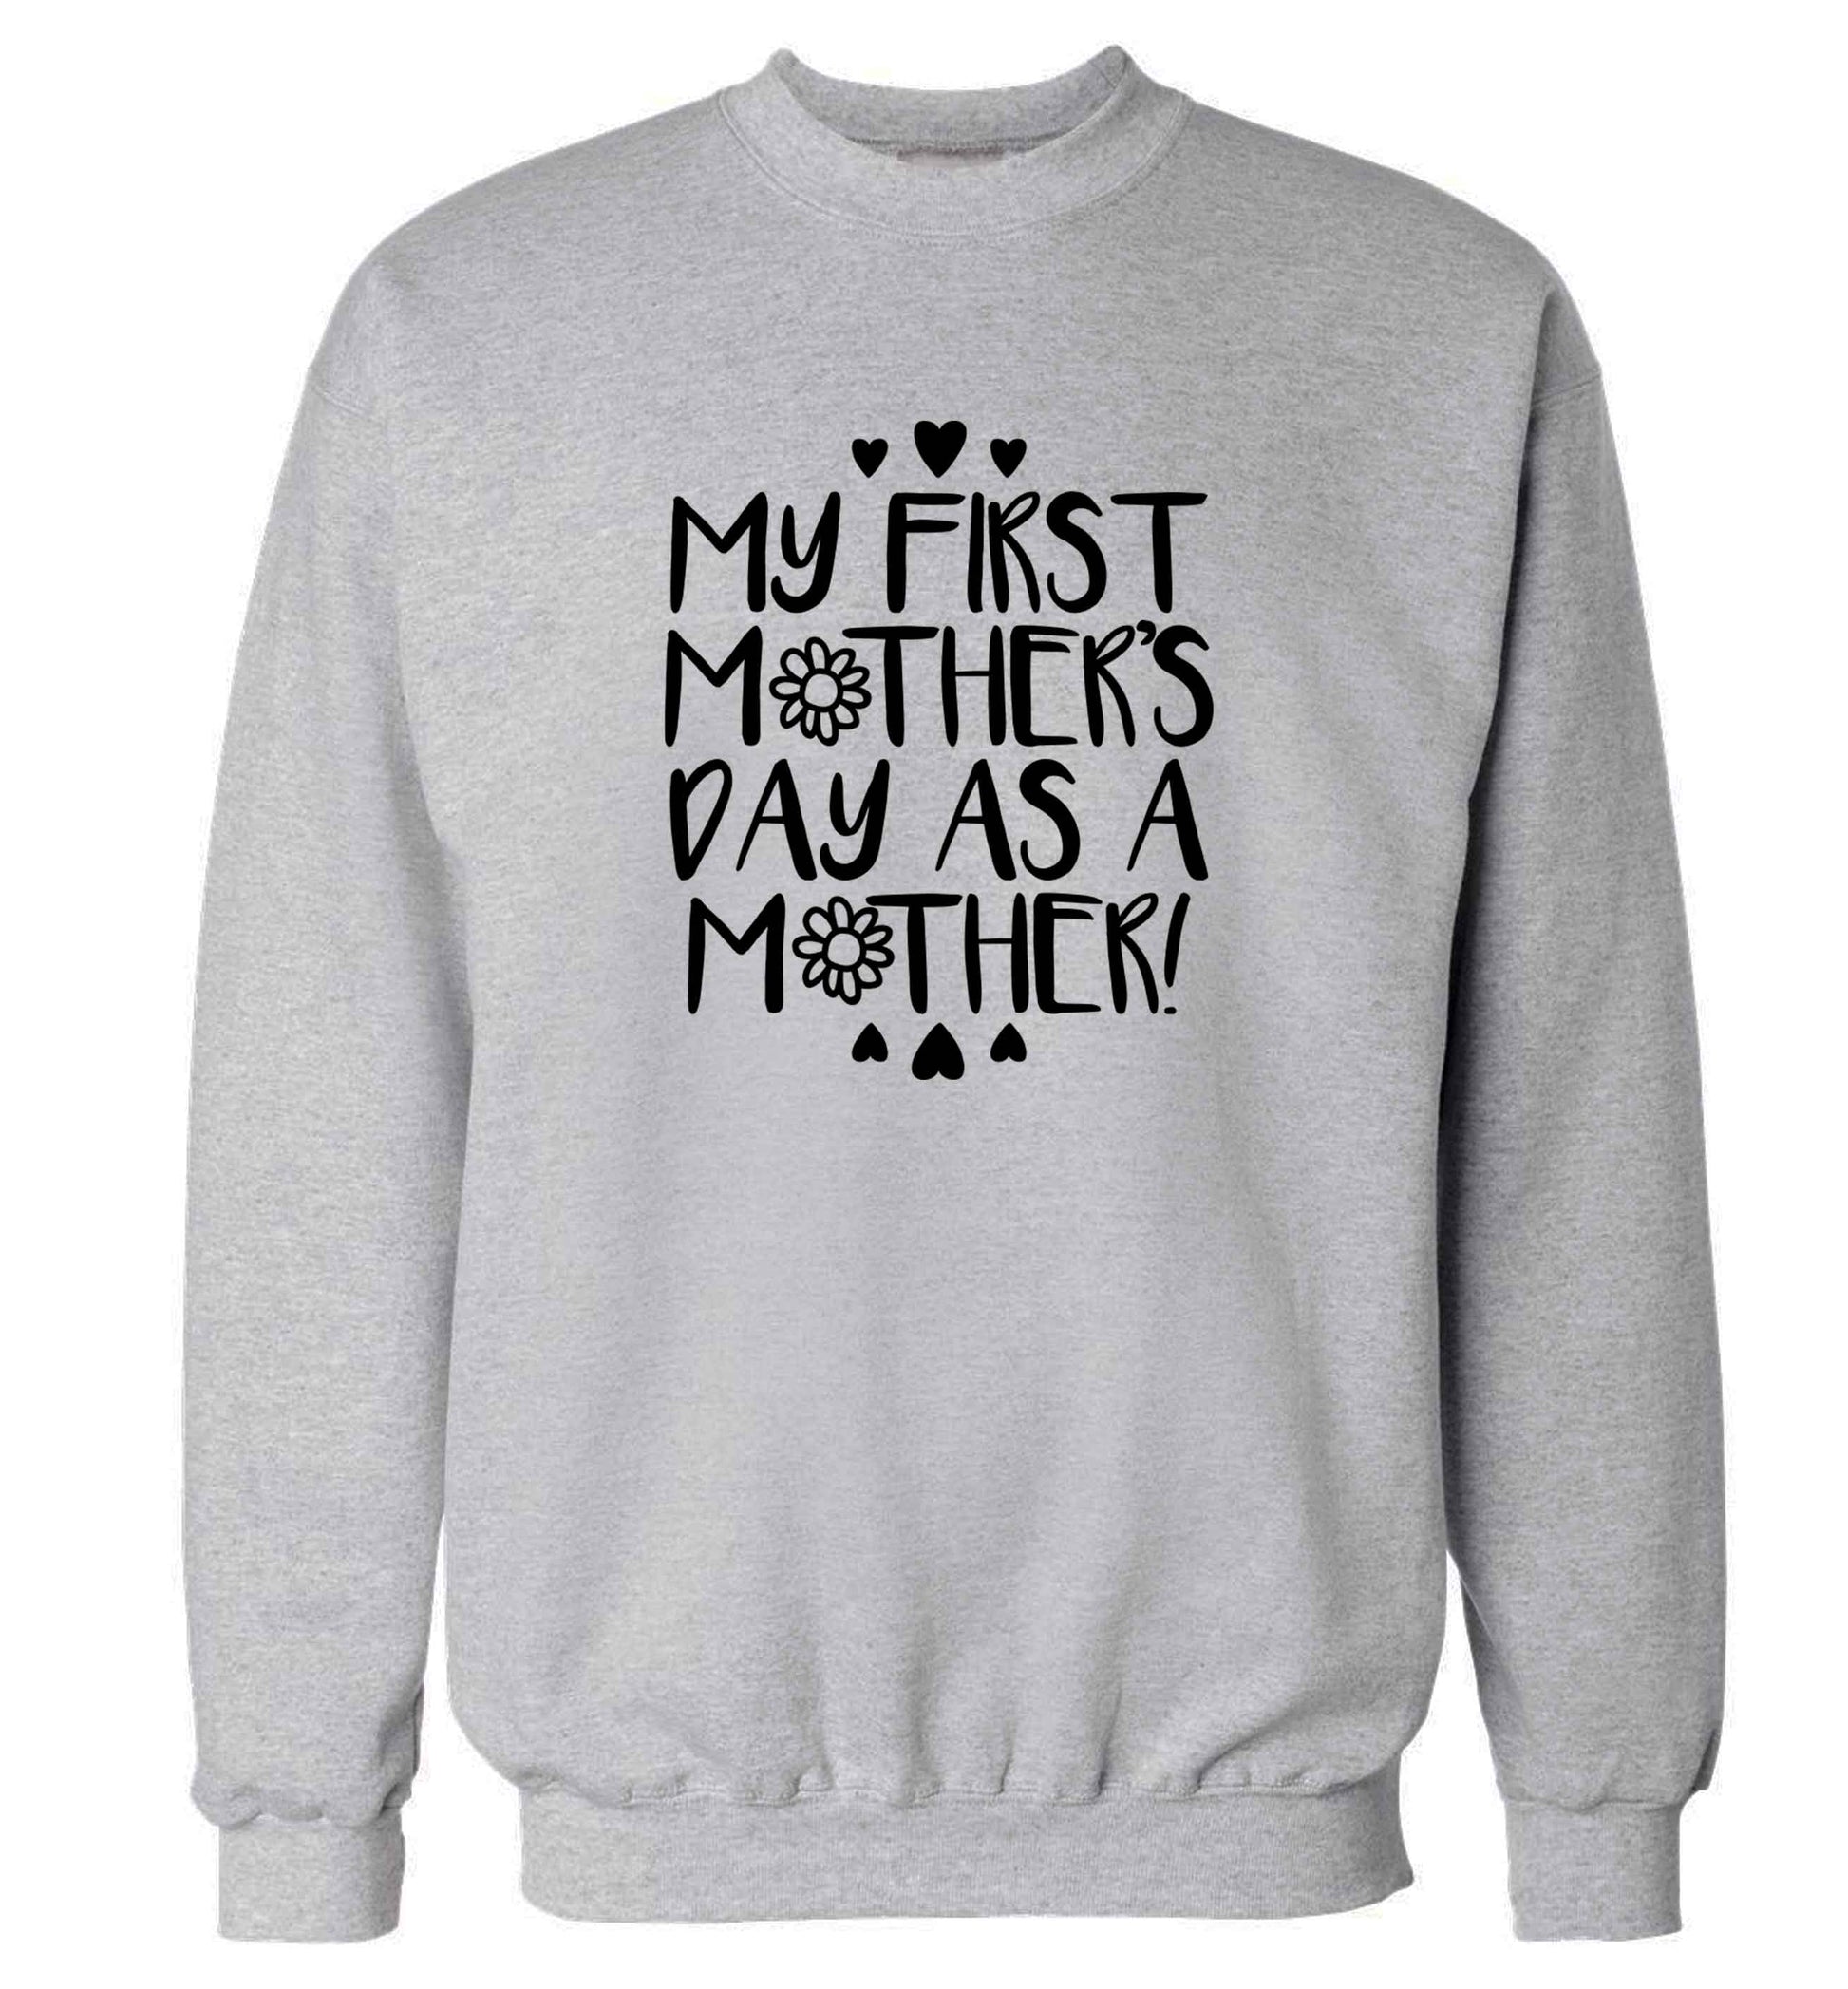 It's my first mother's day as a mother adult's unisex grey sweater 2XL